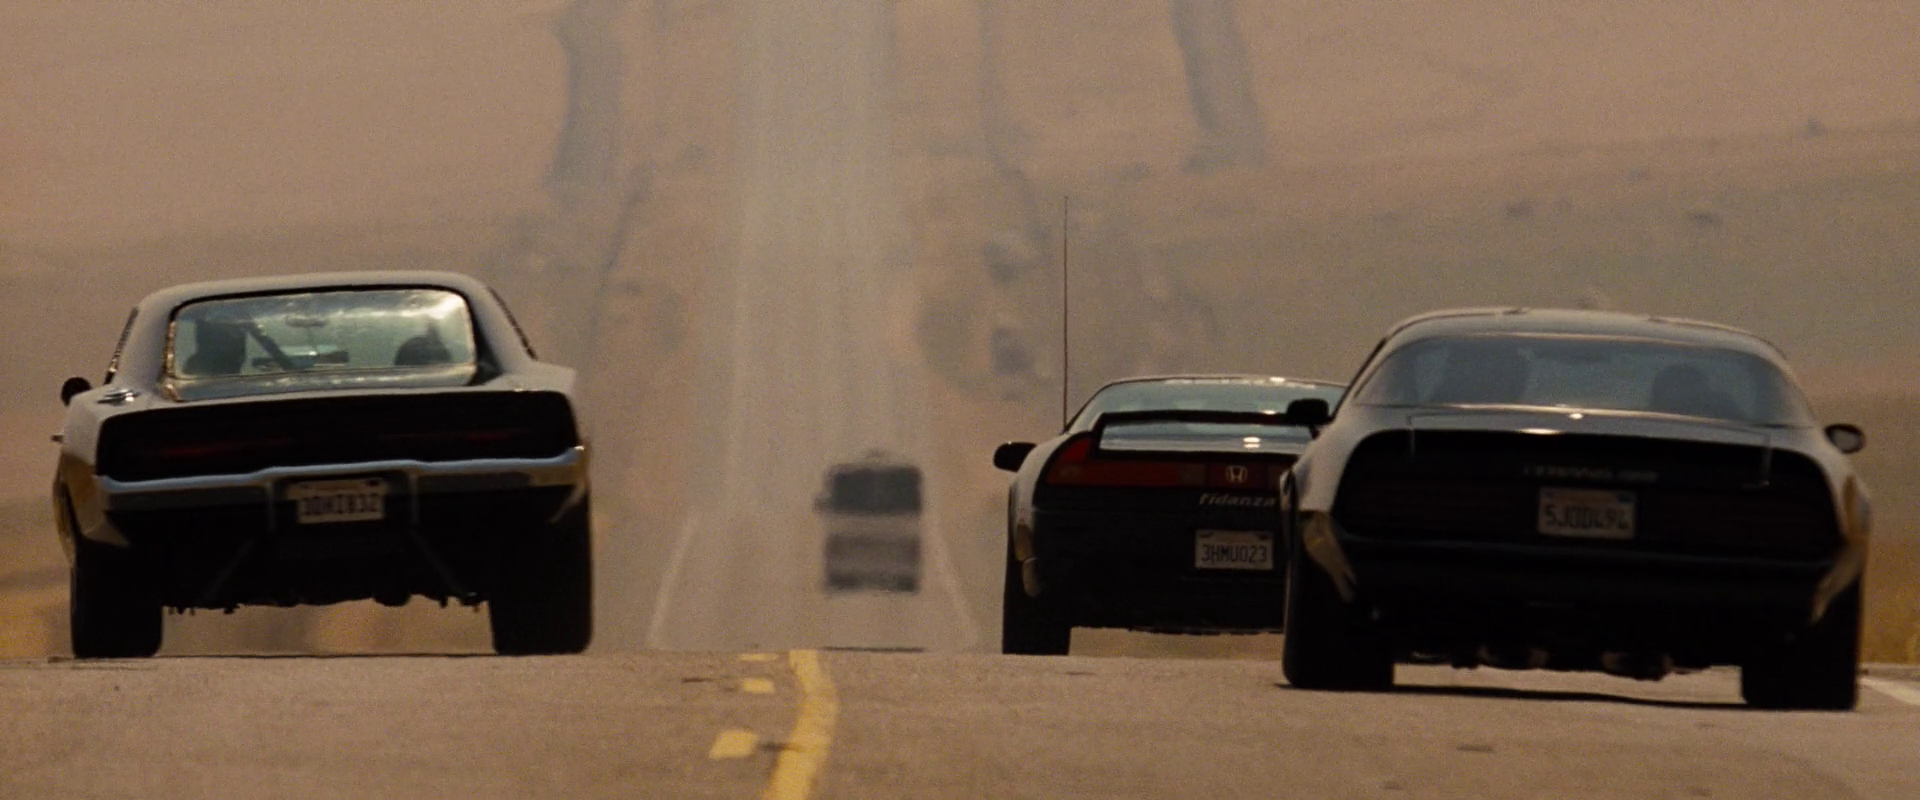 2003 Acura NSX | The Fast and the Furious Wiki | Fandom1920 x 800